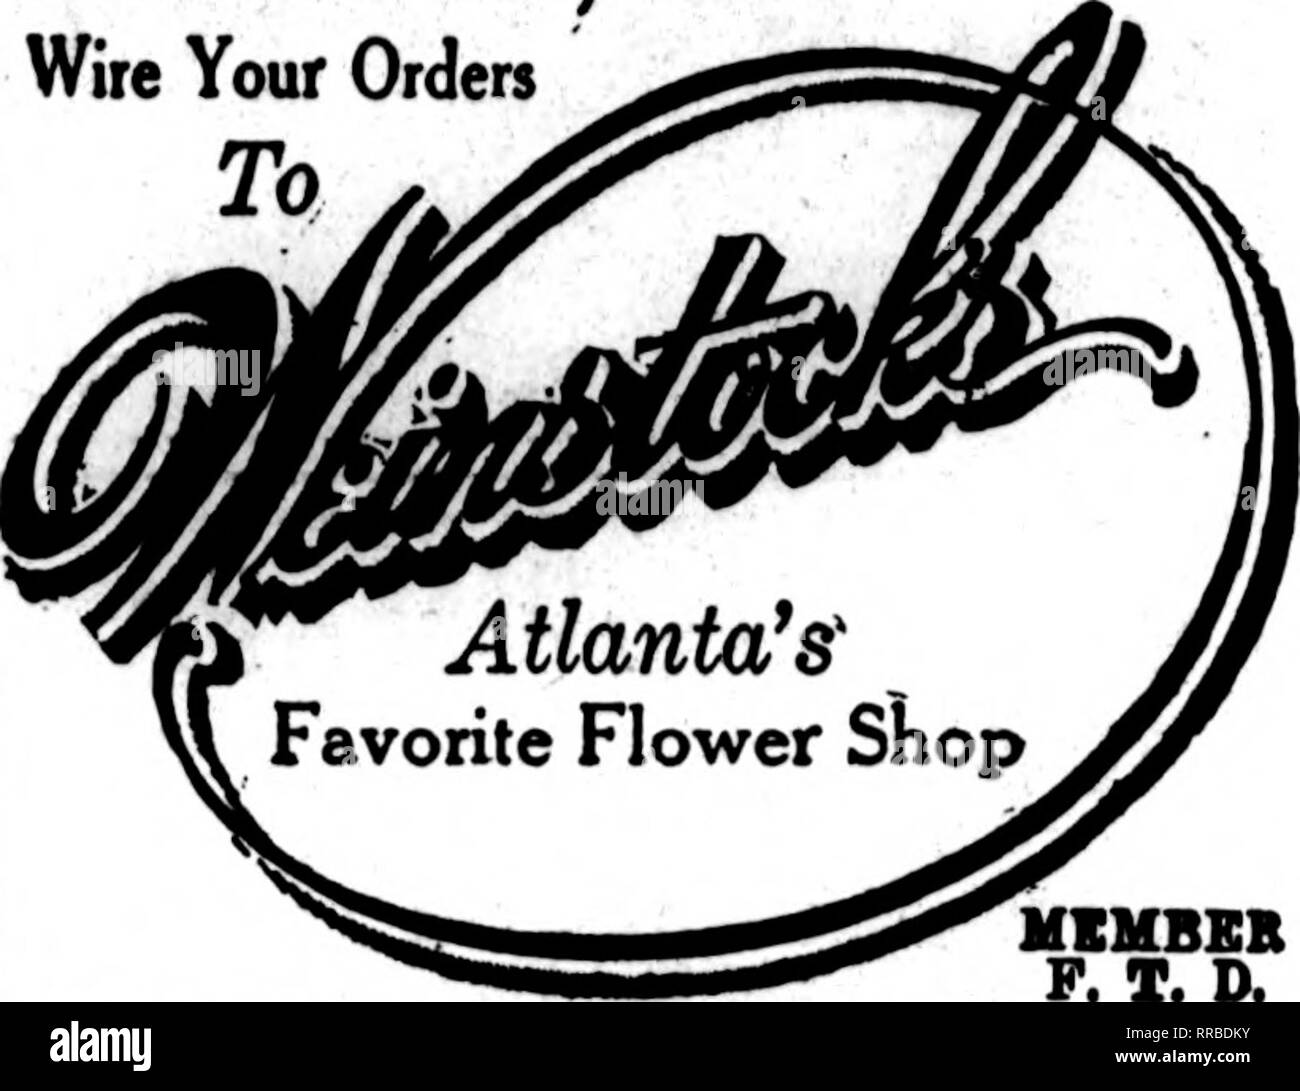 . Florists' review [microform]. Floriculture. FLOWER. SHOP 41 Feachtree Street New Orleans, La. ^'or£«to The Flower Shop 108 Baronne Street HENRY SCHEUERMANN. Prop. AuEuita, Georgia gardens store, 53 E. Honter St.; Greenhouses, 446Lawton St. Wholesale and Retail W. M. Bailey, Ugr. ger, with a vase of White Enchantress; Phil Goebel, with carnations and sweet peas, and Samuel Pierce, with a vase of Darwin tulips. Joseph Hauser and William Eckle- mann staged a fine exhibit of sweet peas and violets. Henry Braun and the St. Louis Wholesale Cut Flower Co. each staged some well-grown plants. A risin Stock Photo